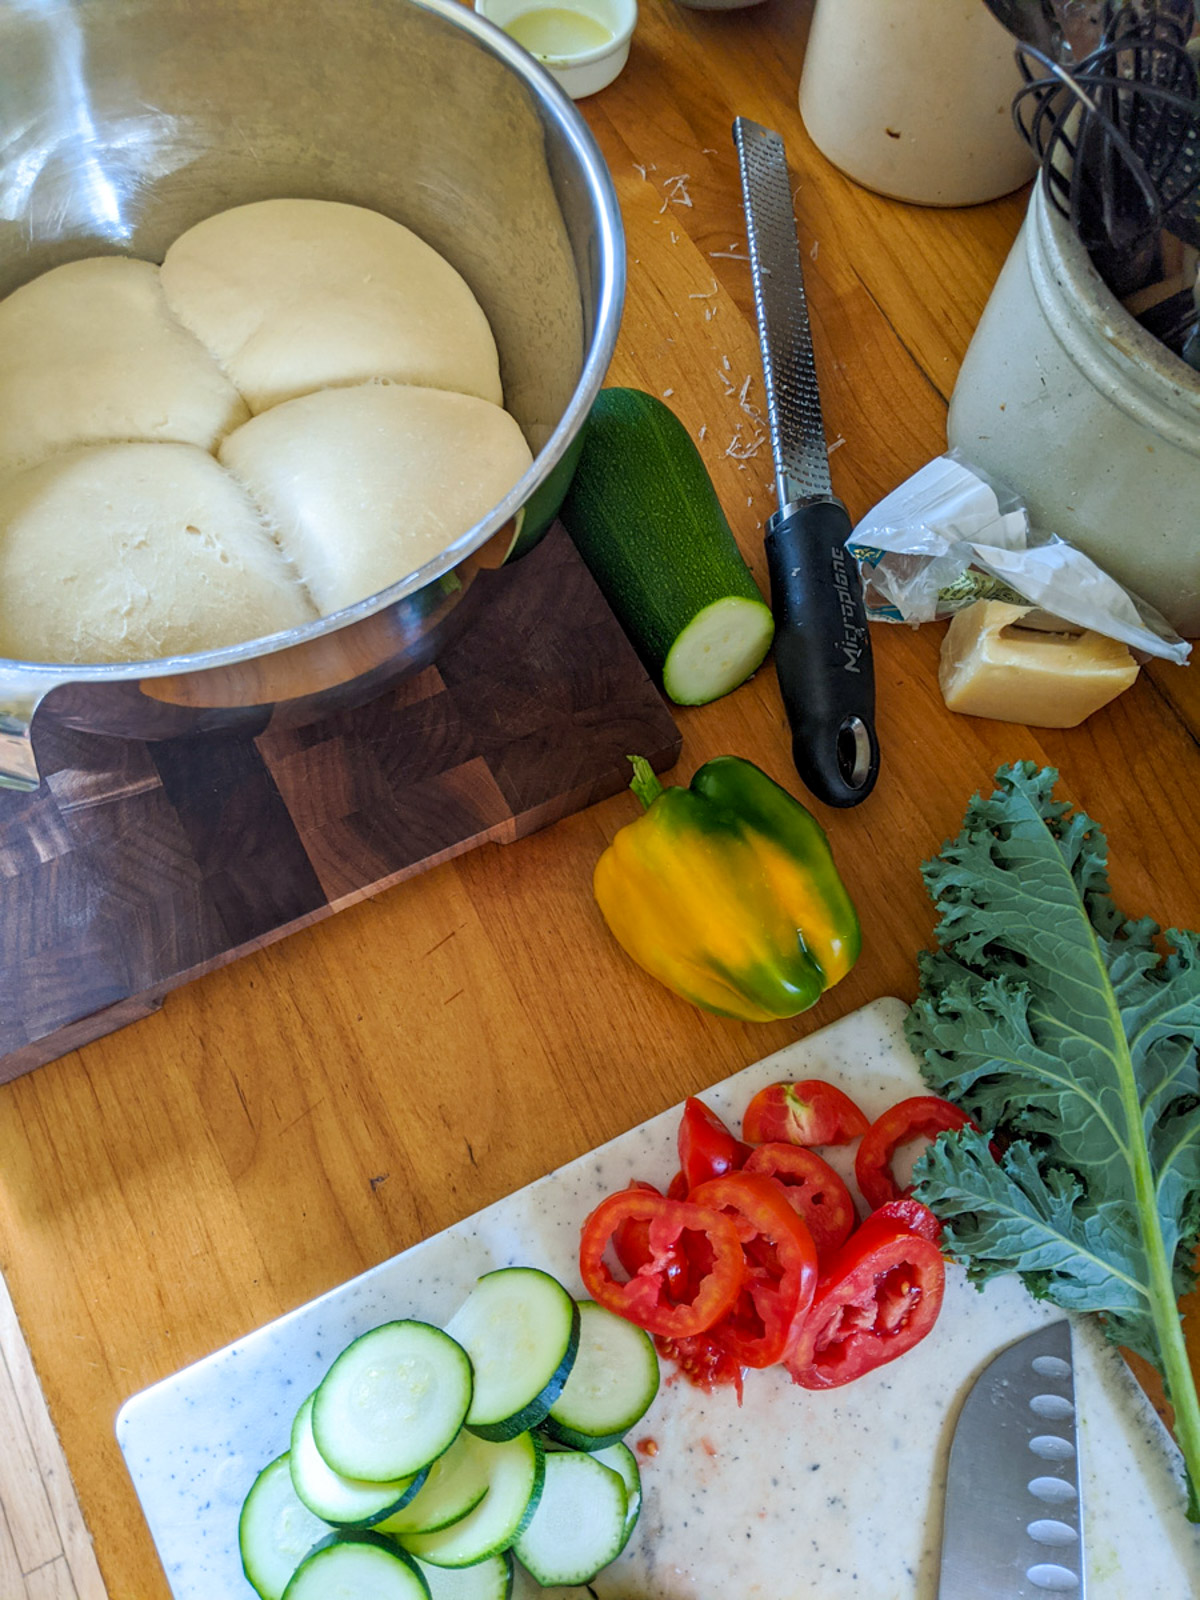 Homemade Pizza - The Complete Process - Sungrown Kitchen